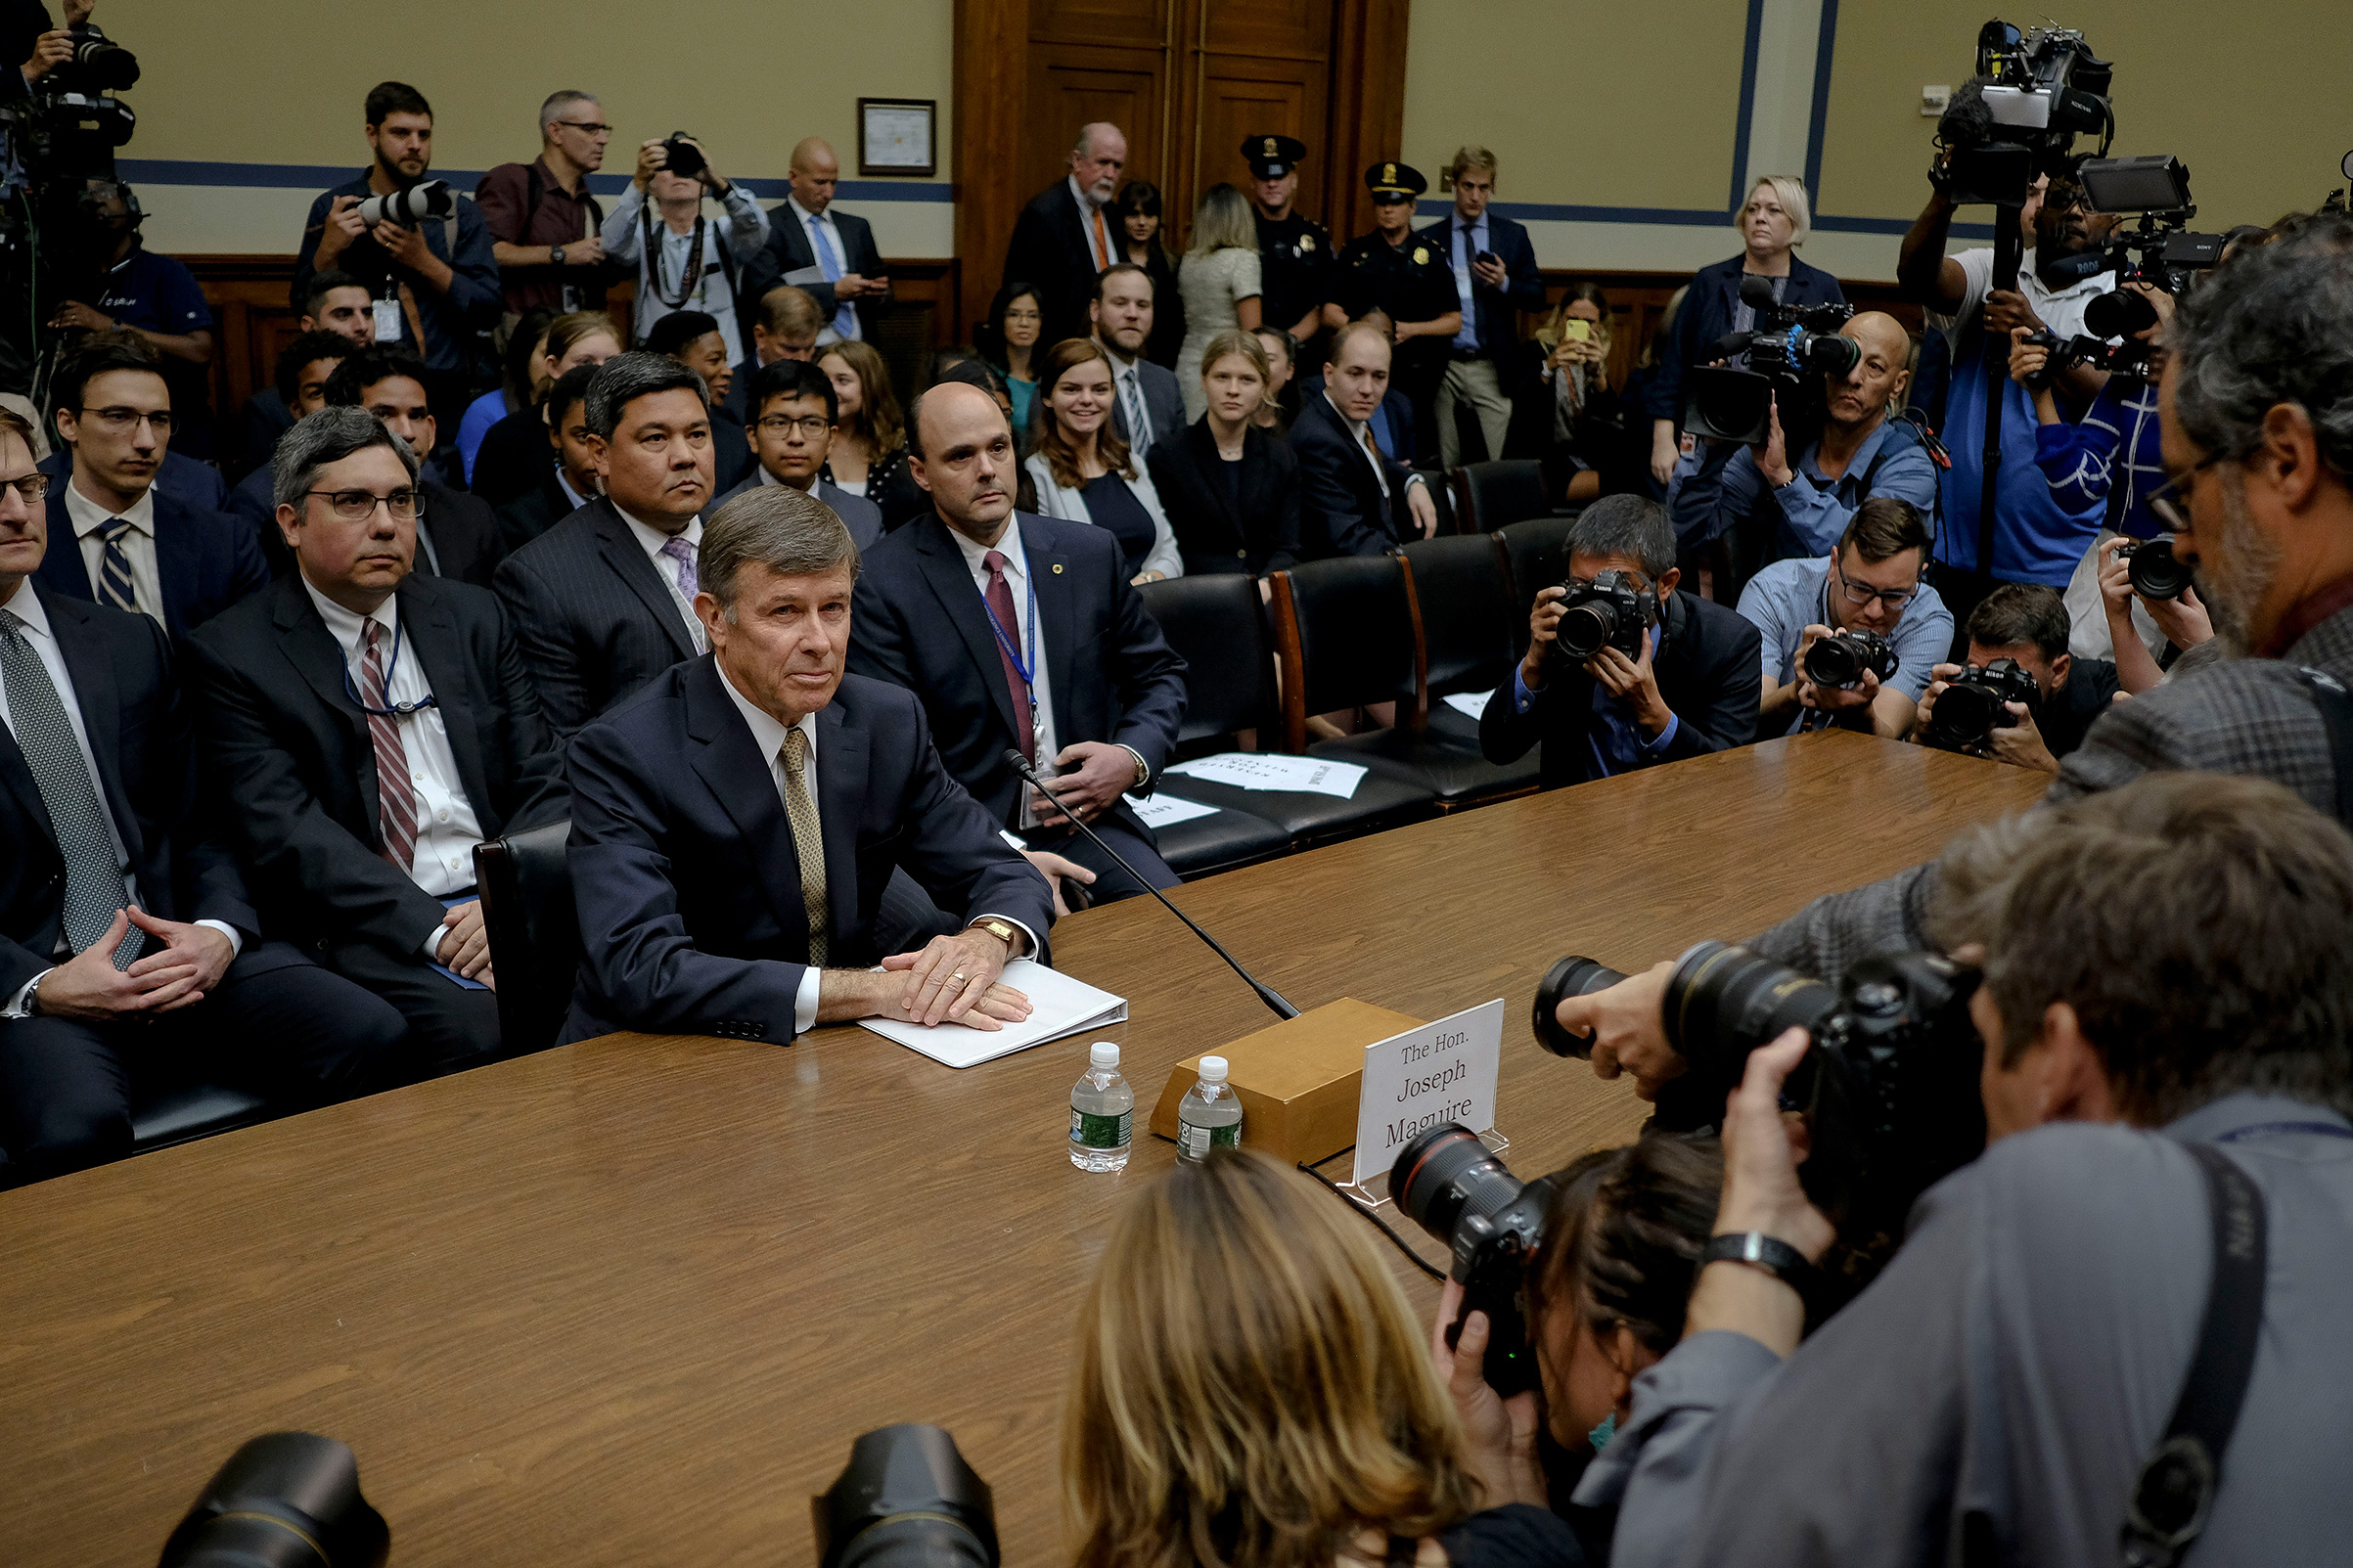 Acting Director of National Intelligence Joseph Maguire enters the House Intelligence Permanent Select Committee hearing room to testify on the whistleblower at the Rayburn House Office Building on Capitol Hill in Washington, D.C. on Sept. 26, 2019. (Gabriella Demczuk for TIME)